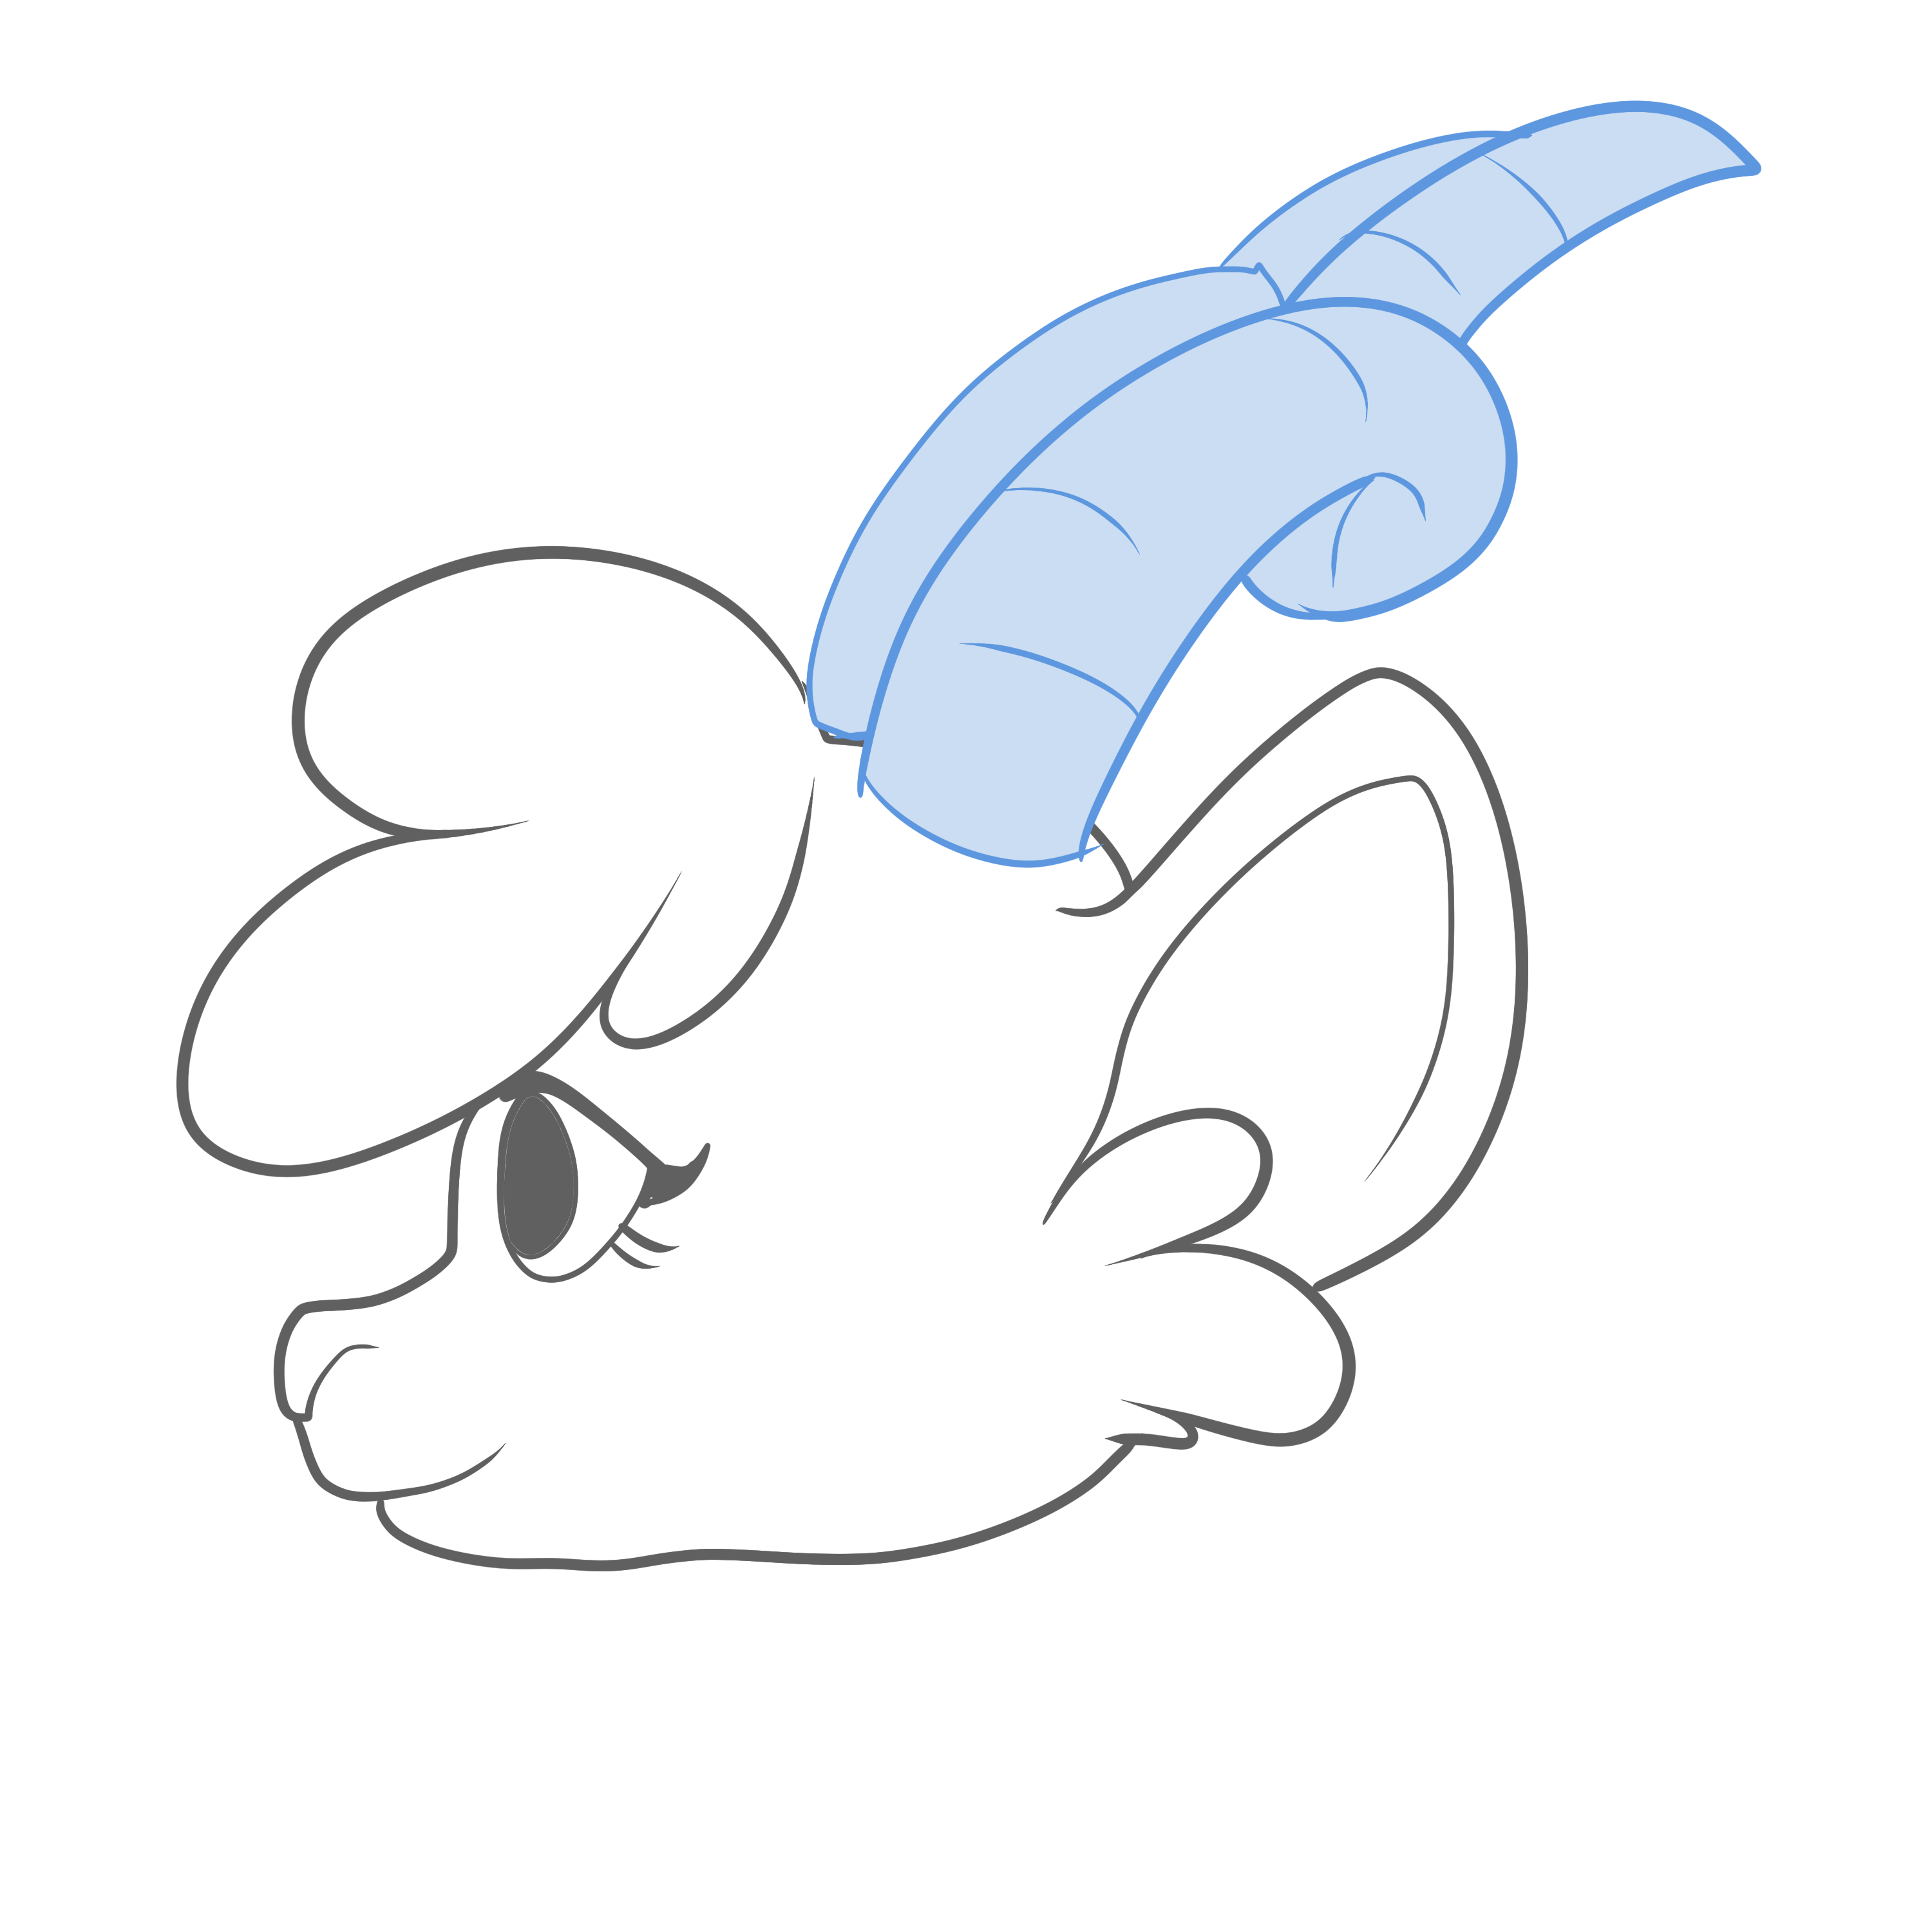 Horns, Squiggly